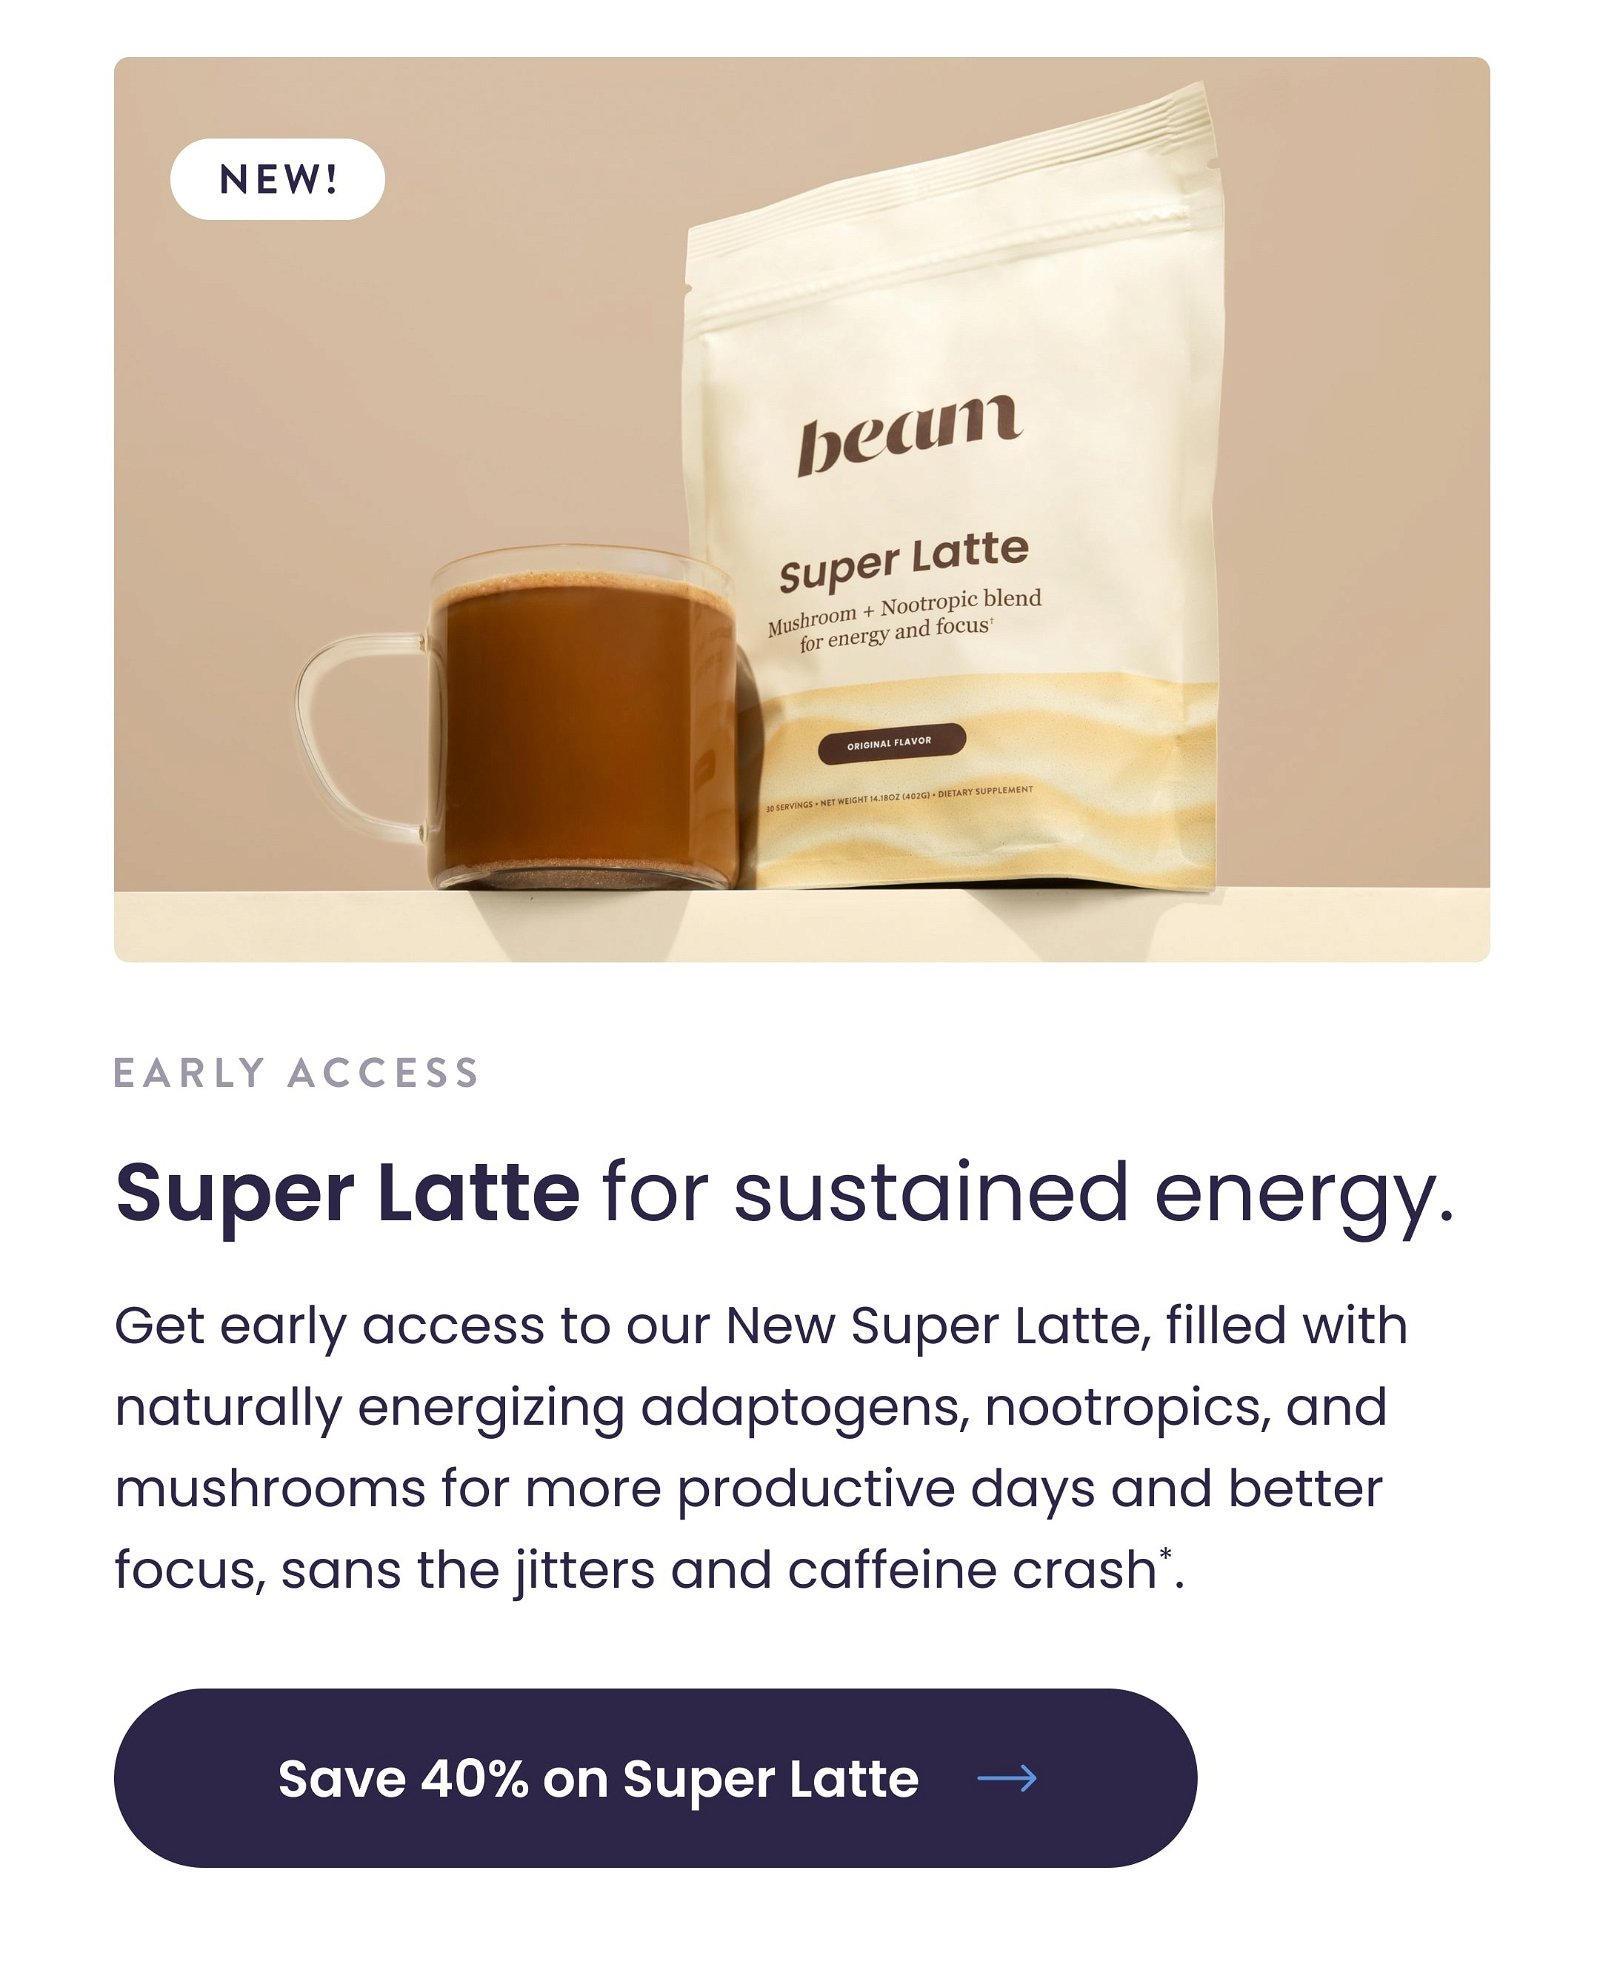 Get early access to our New Super Latte, filled with naturally energizing adaptogens, nootropics, and mushrooms for more productive days and better focus, sans the jitters and caffeine crash*.